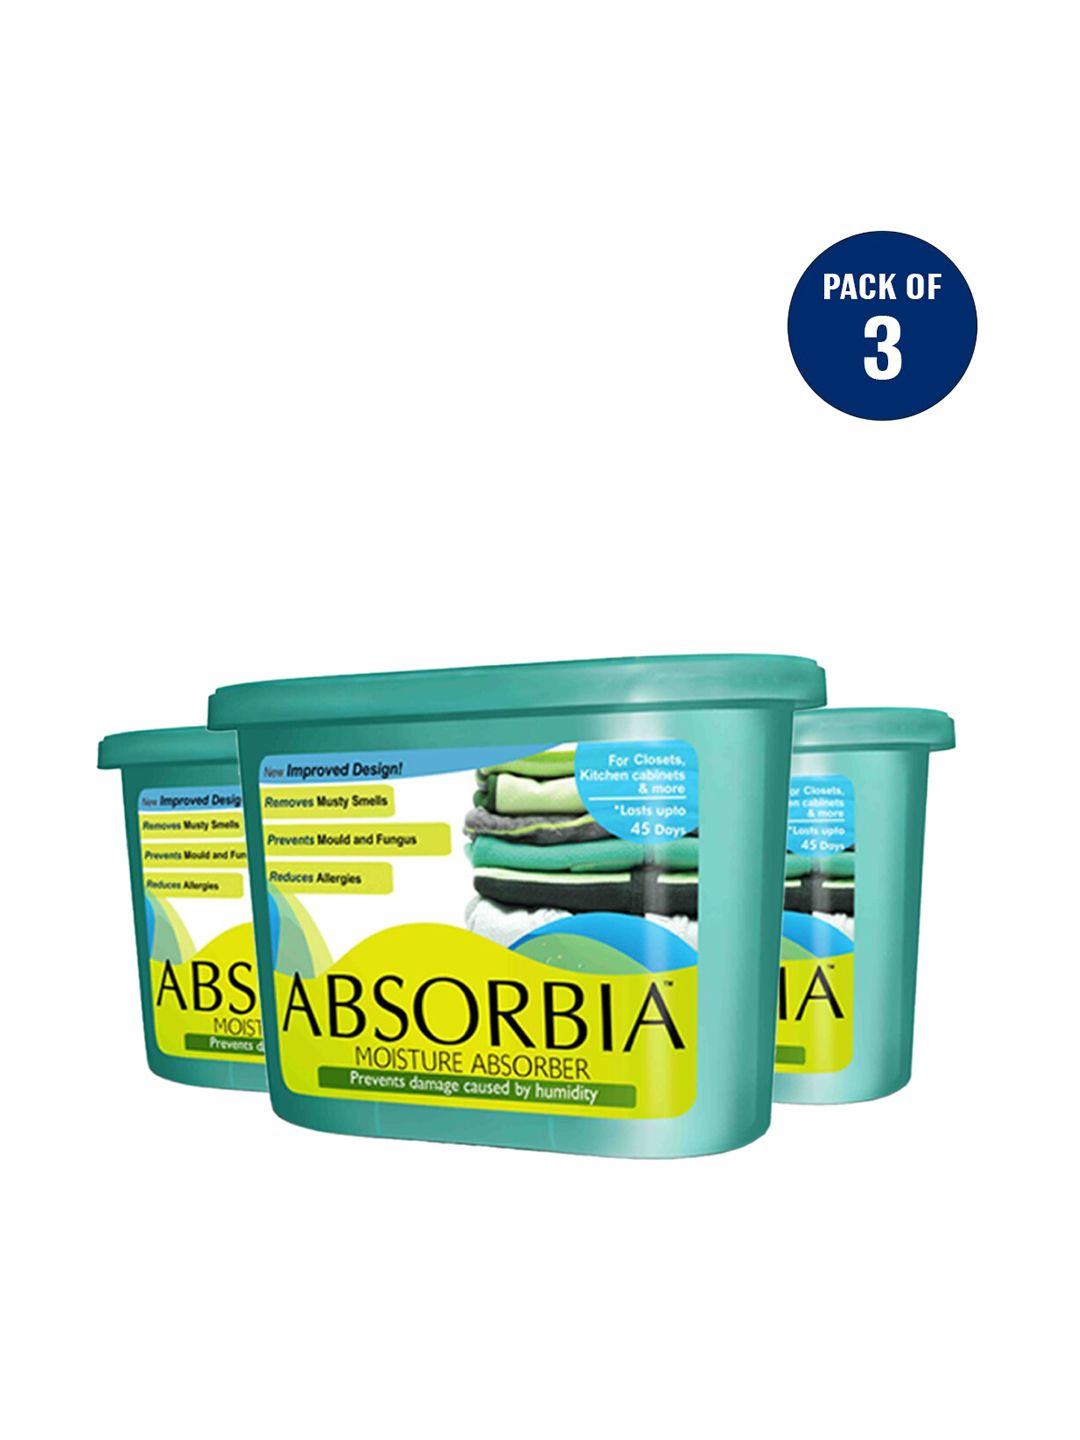 Absorbia Pack of 3 Moisture Absorber 600ml Price in India